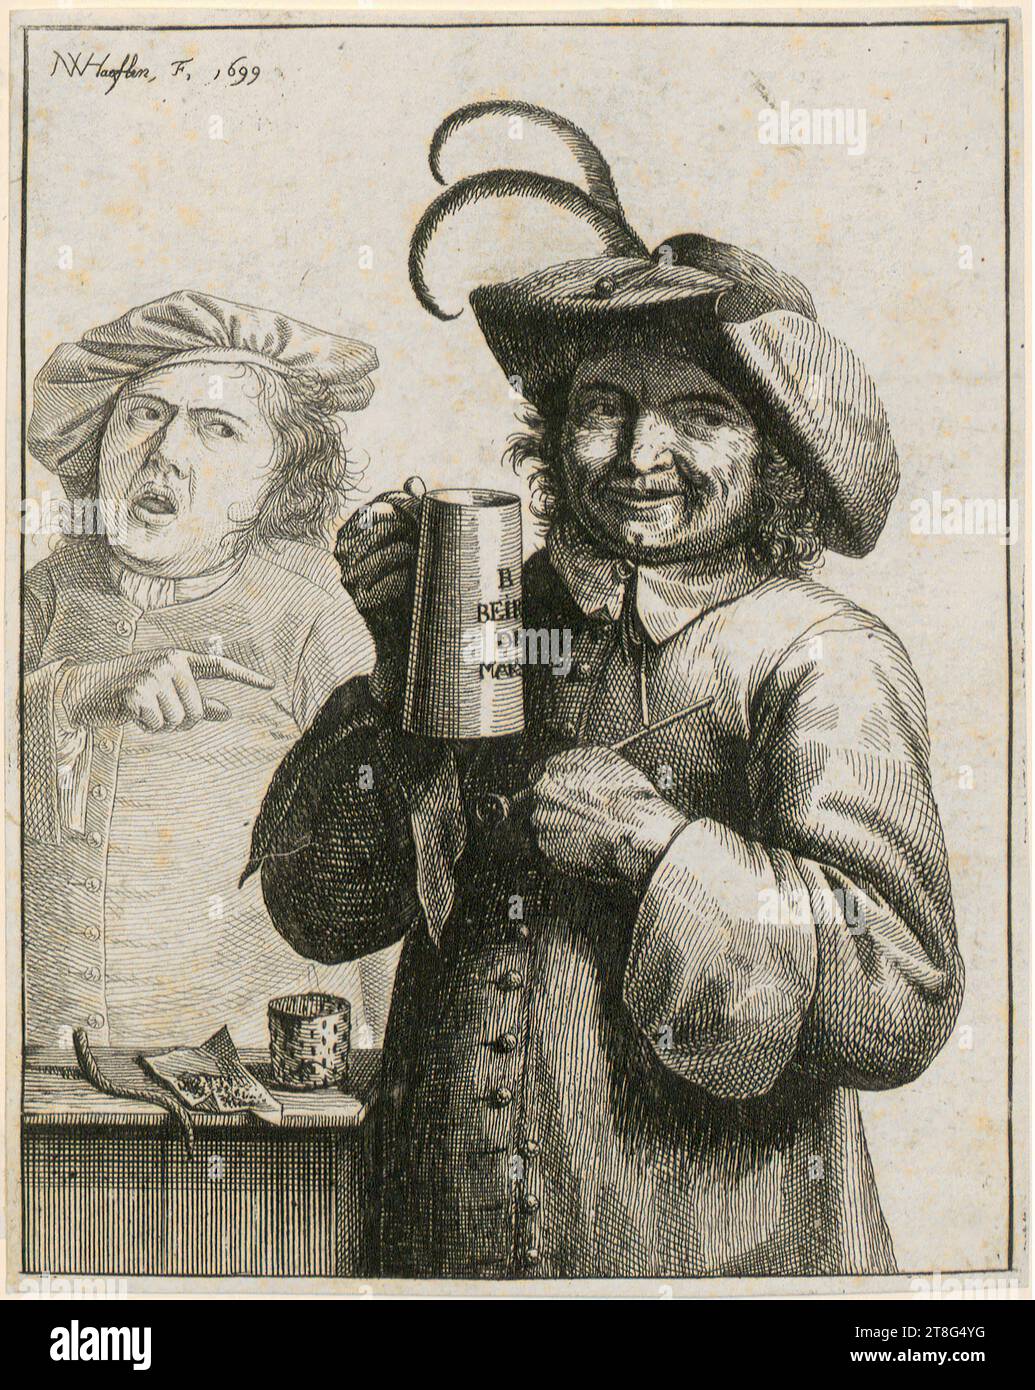 Nicolas van Haften (1663 um - 1715), smoker with jug and pipe, in the background a second man, print date: 1699, etching, sheet size: 15.2 x 12.1 cm, signed and dated upper left 'NVHaeften F. 1699' and inscribed on the jug 'B BEIR DE MARS Stock Photo